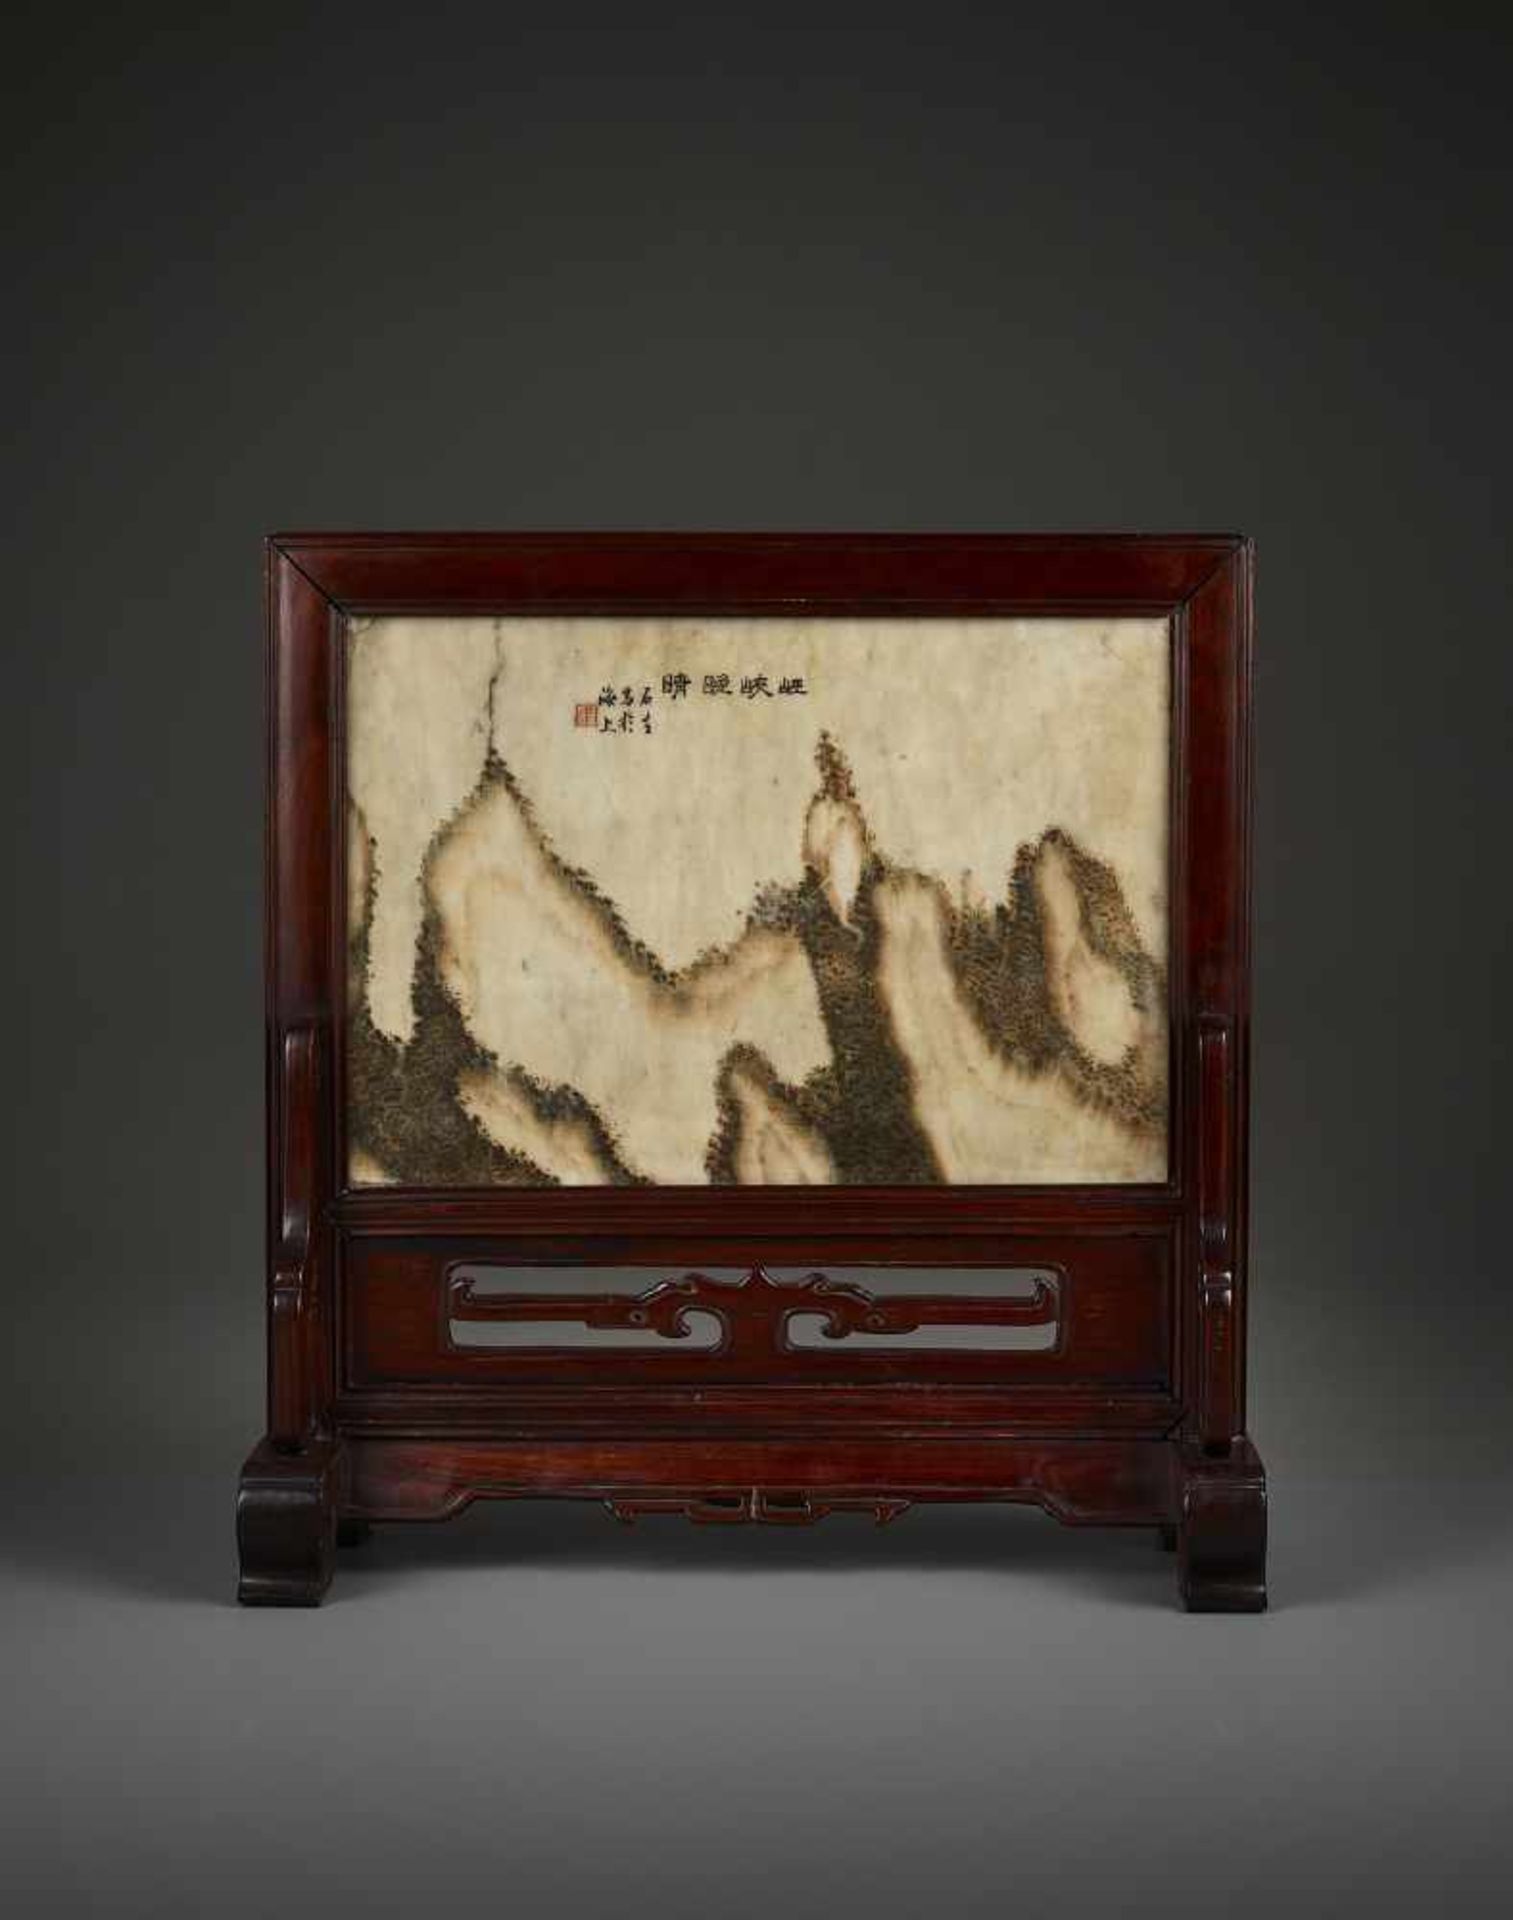 A DREAMSTONE ‘WU GORGE’ SCREEN, 18TH China, 18th century. Inscribed ‘Wu Xia Gorge clearing up in the